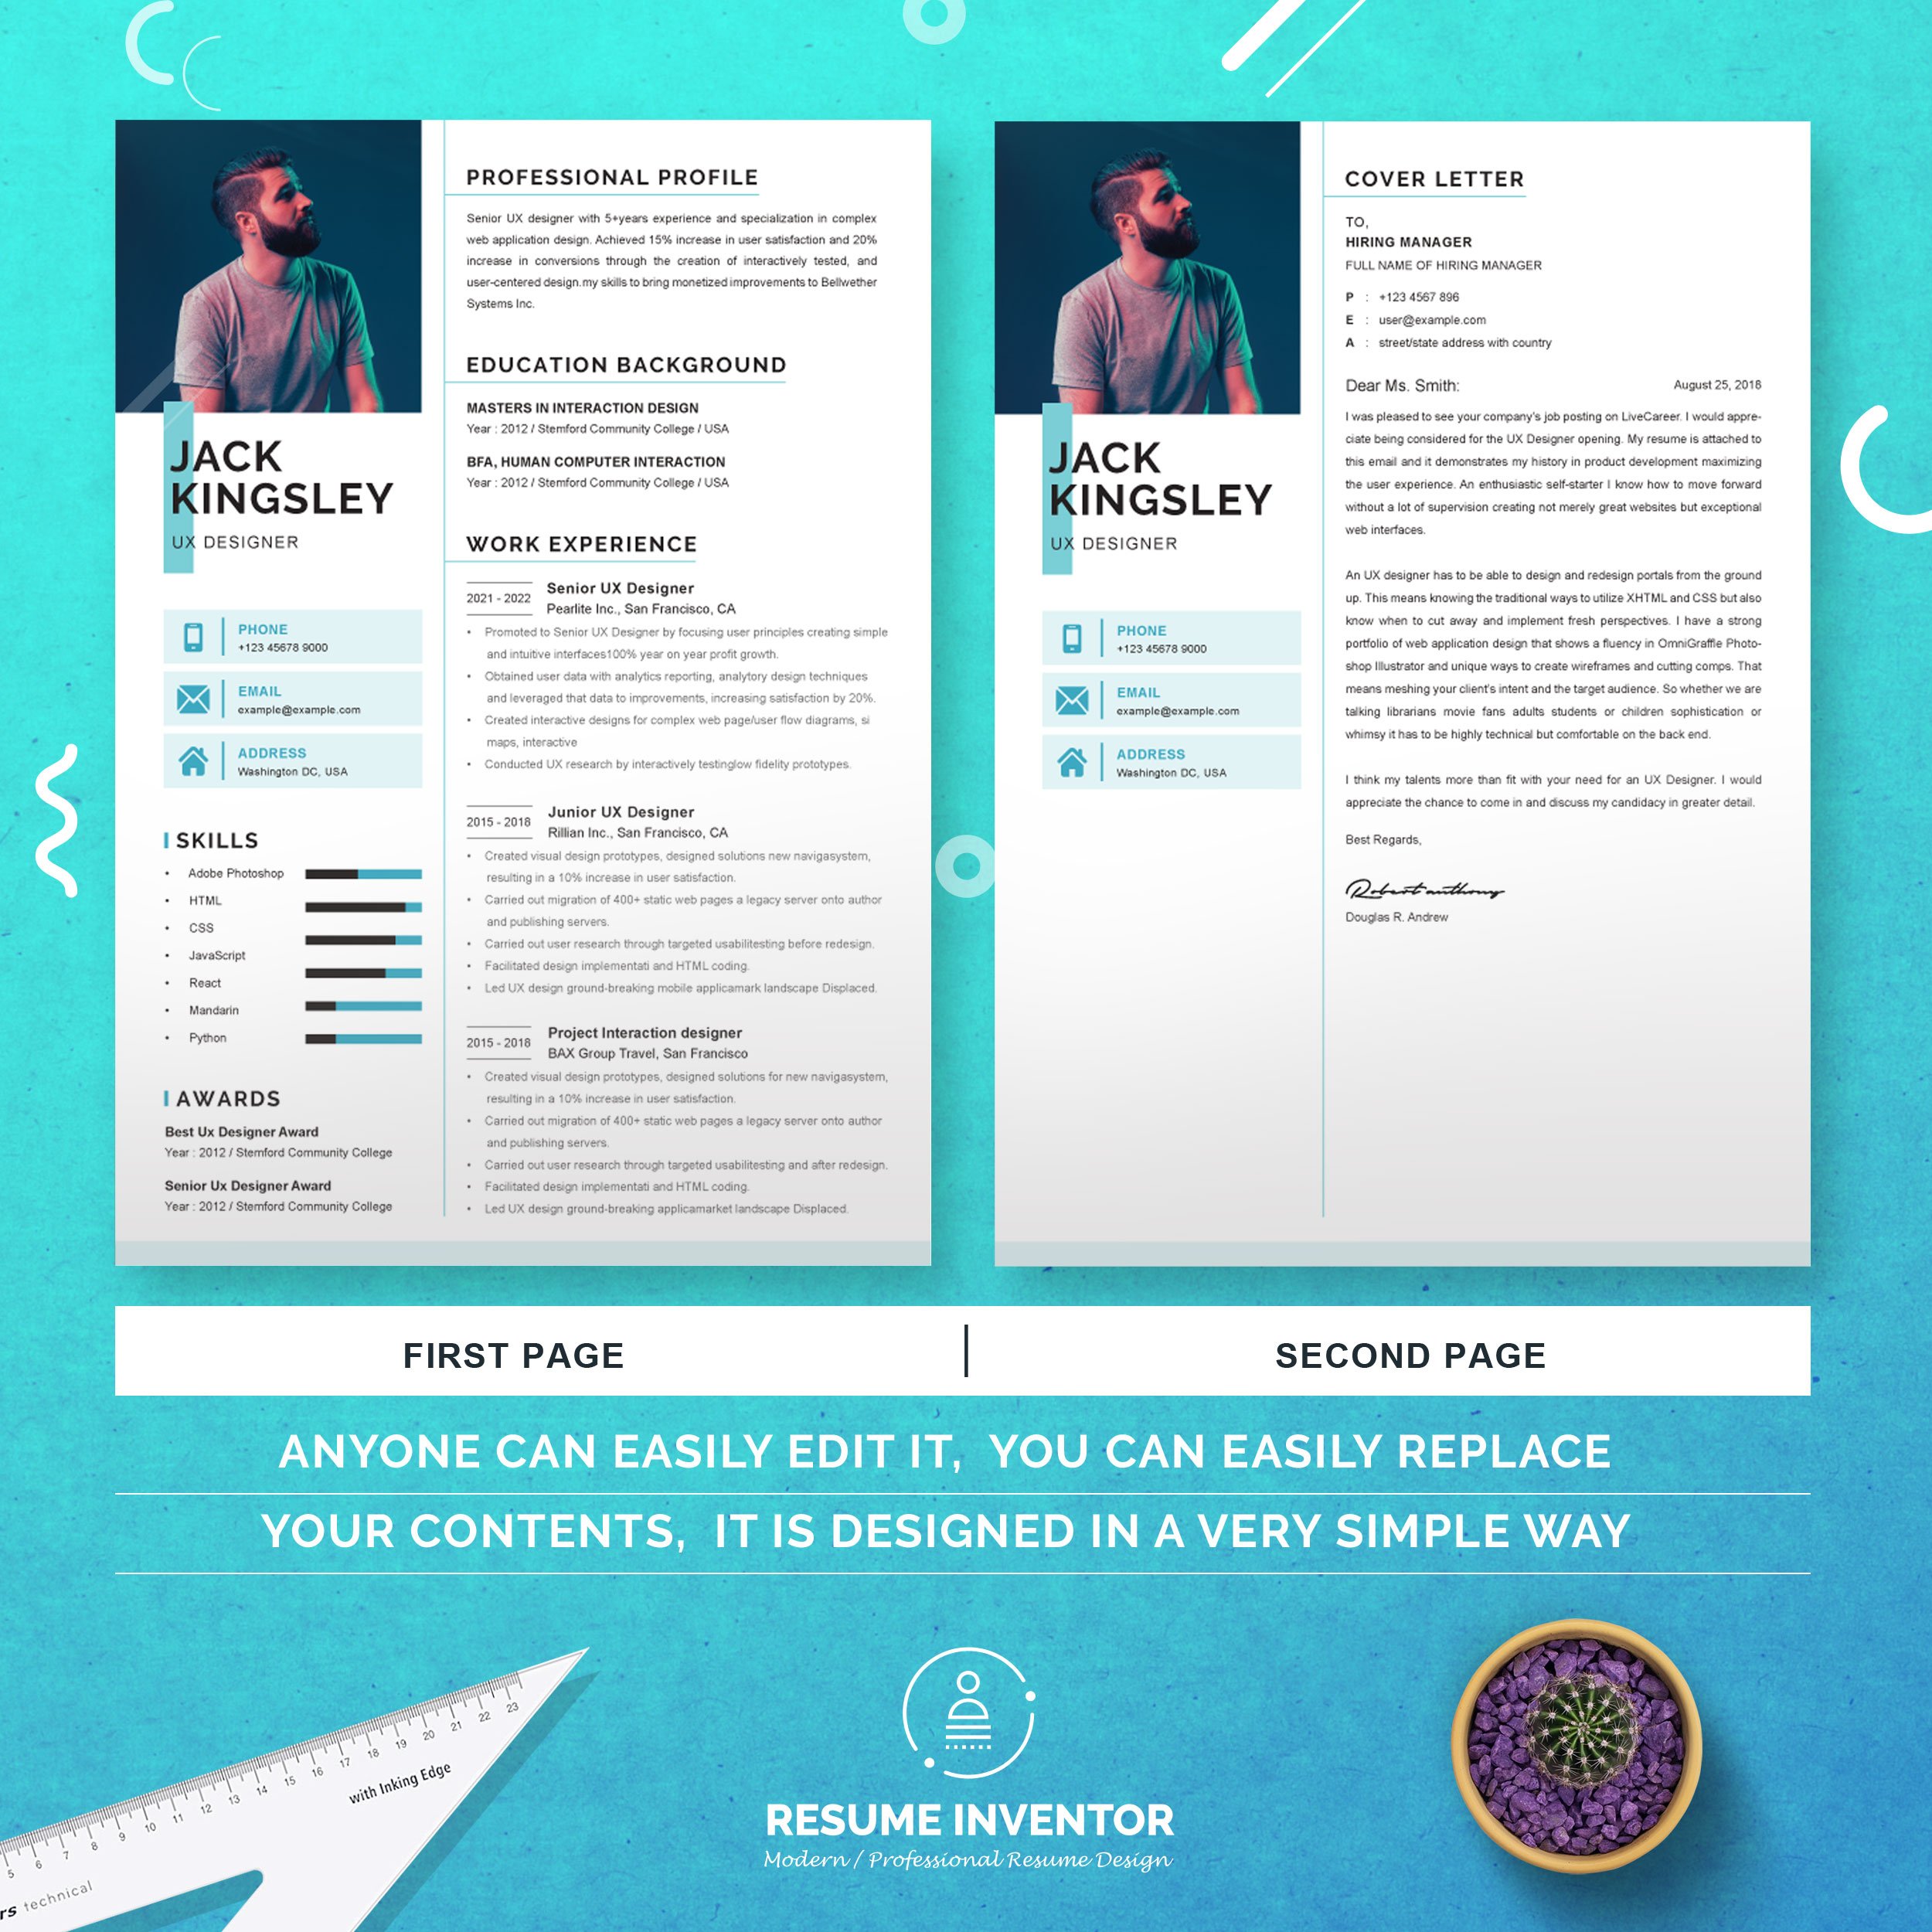 UX Designer Clean and Modern Resume preview image.